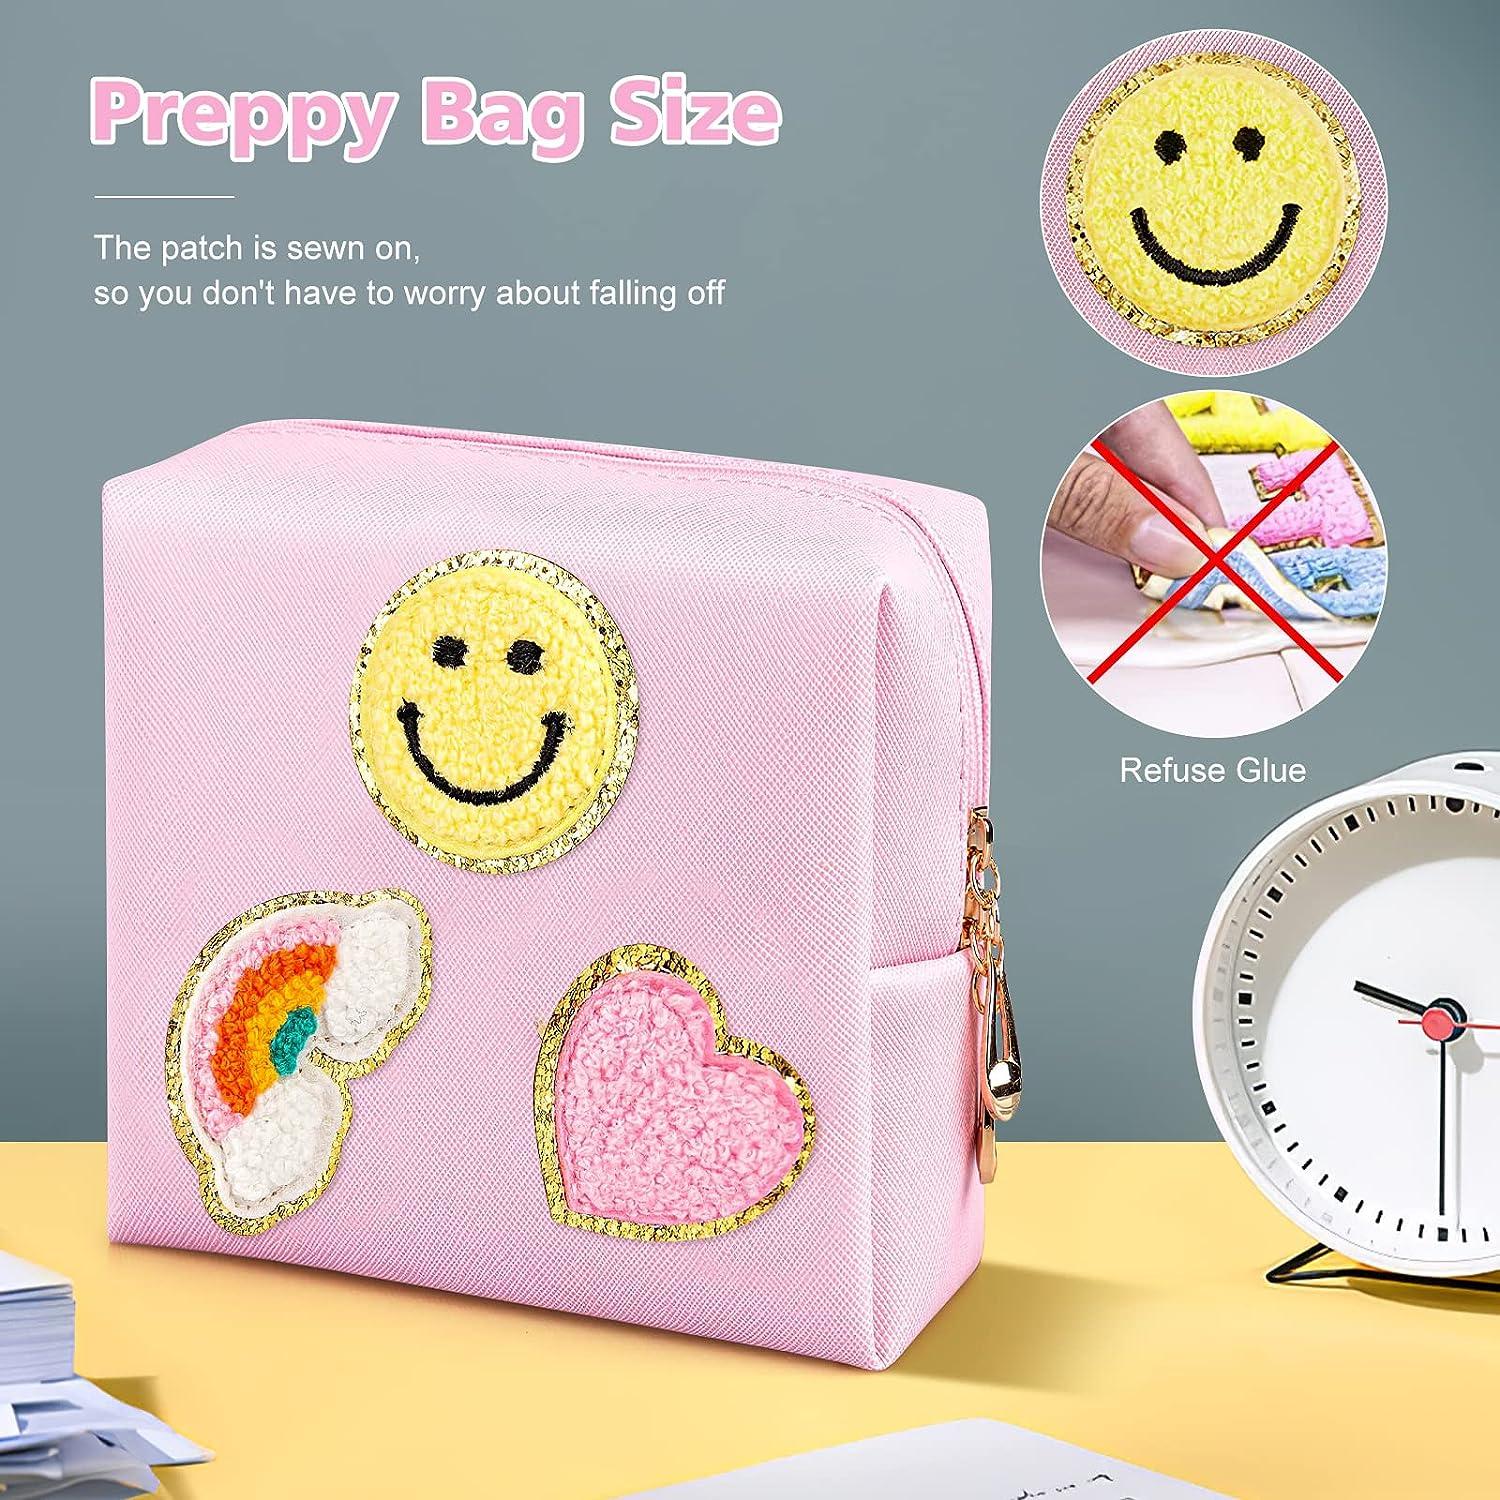  2 Pack Period Bag for Teen Aged Girls, Sanitary Napkin Storage  Bag, Functional Waterproof Sanitary Pads Bags for Panty Liners, Tampons,  Menstrual Cups Pouches, Sanitary Pads Organizer with Zipper : Health